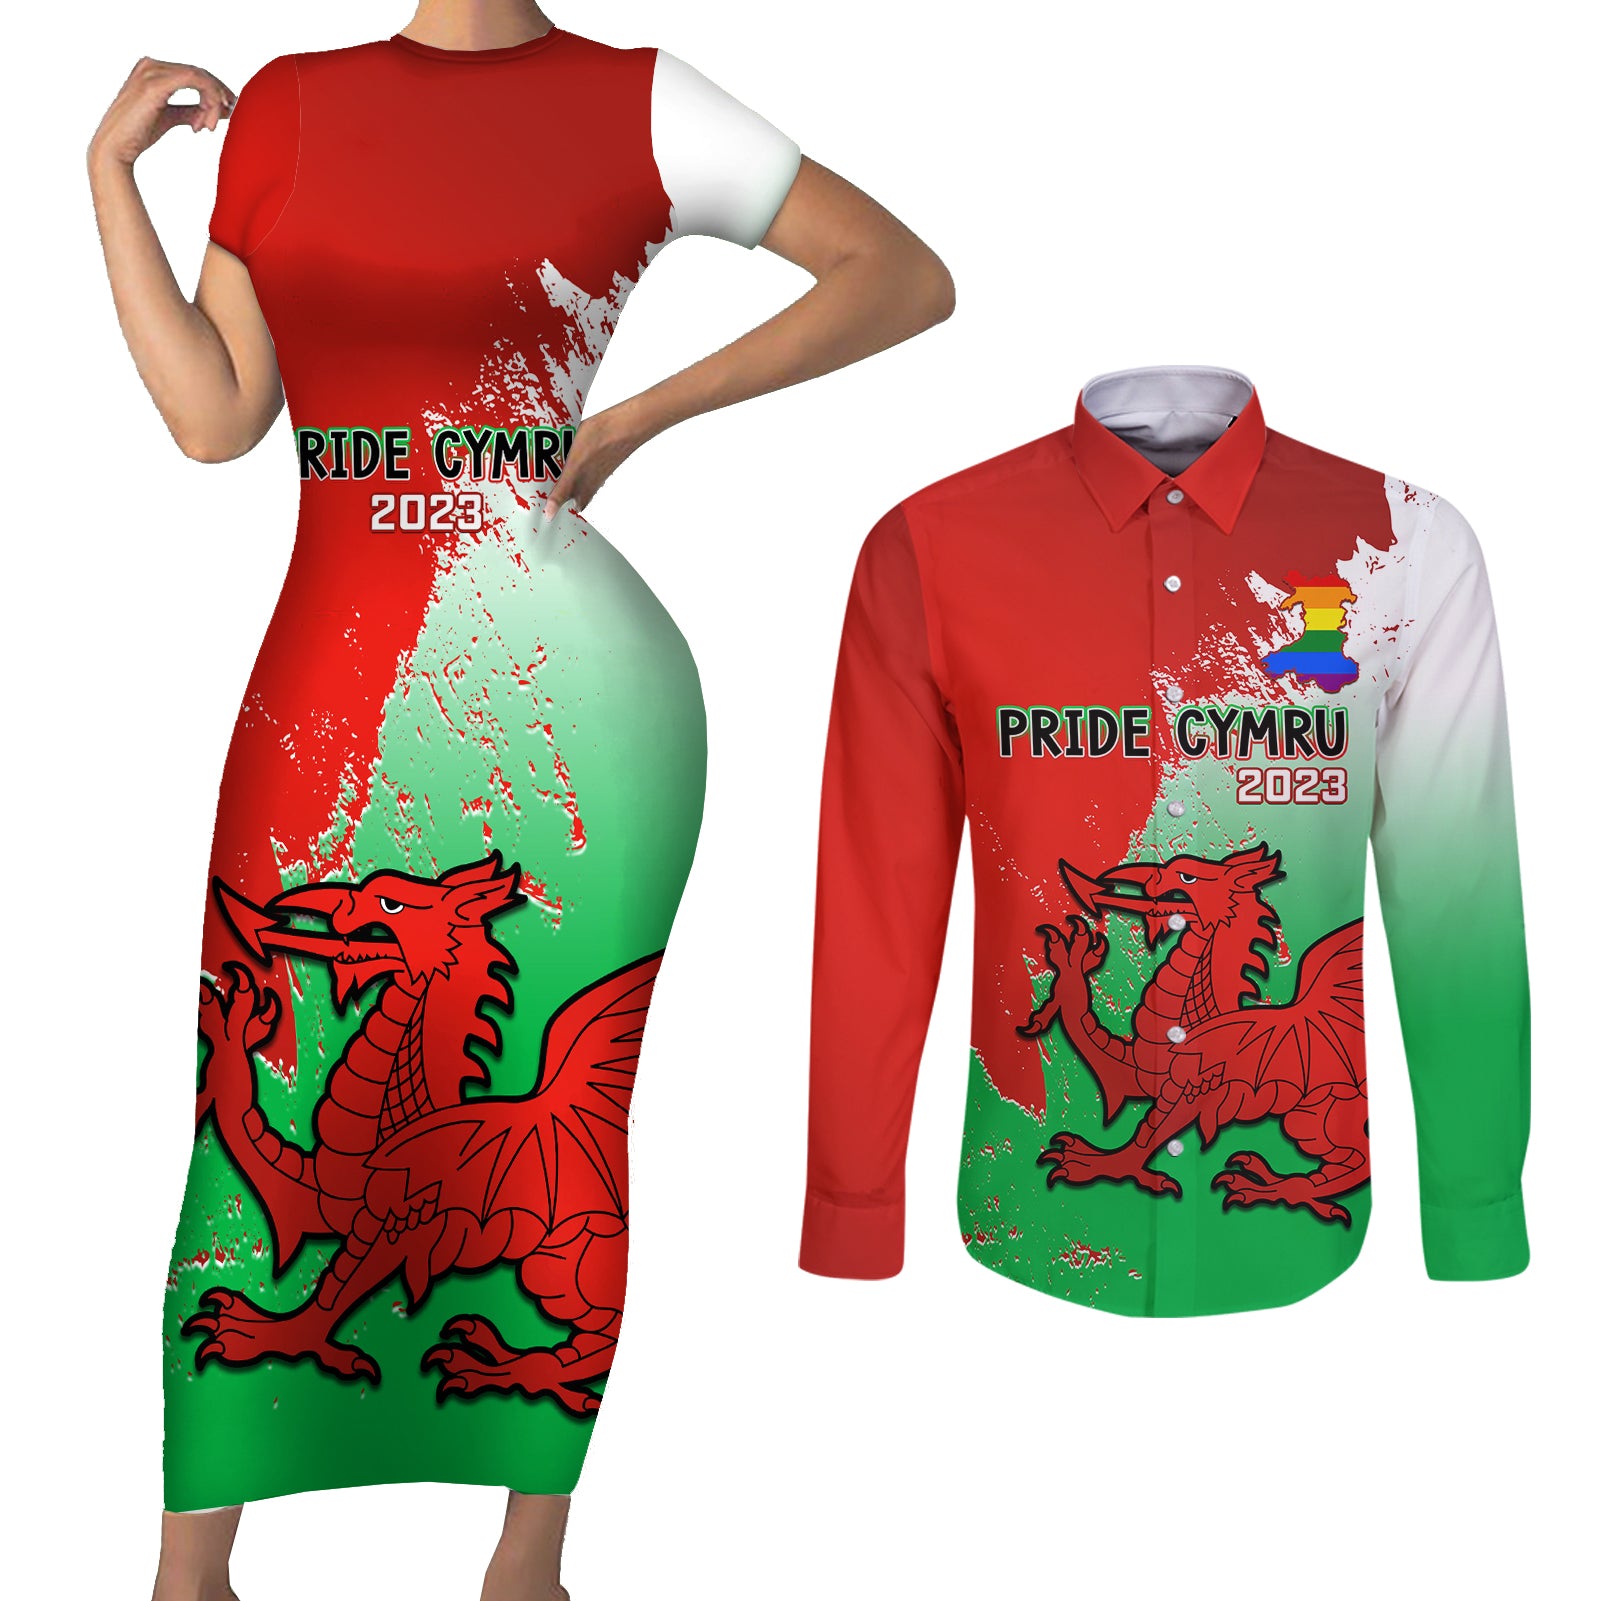 custom-pride-cymru-couples-matching-short-sleeve-bodycon-dress-and-long-sleeve-button-shirts-2023-wales-lgbt-with-welsh-red-dragon